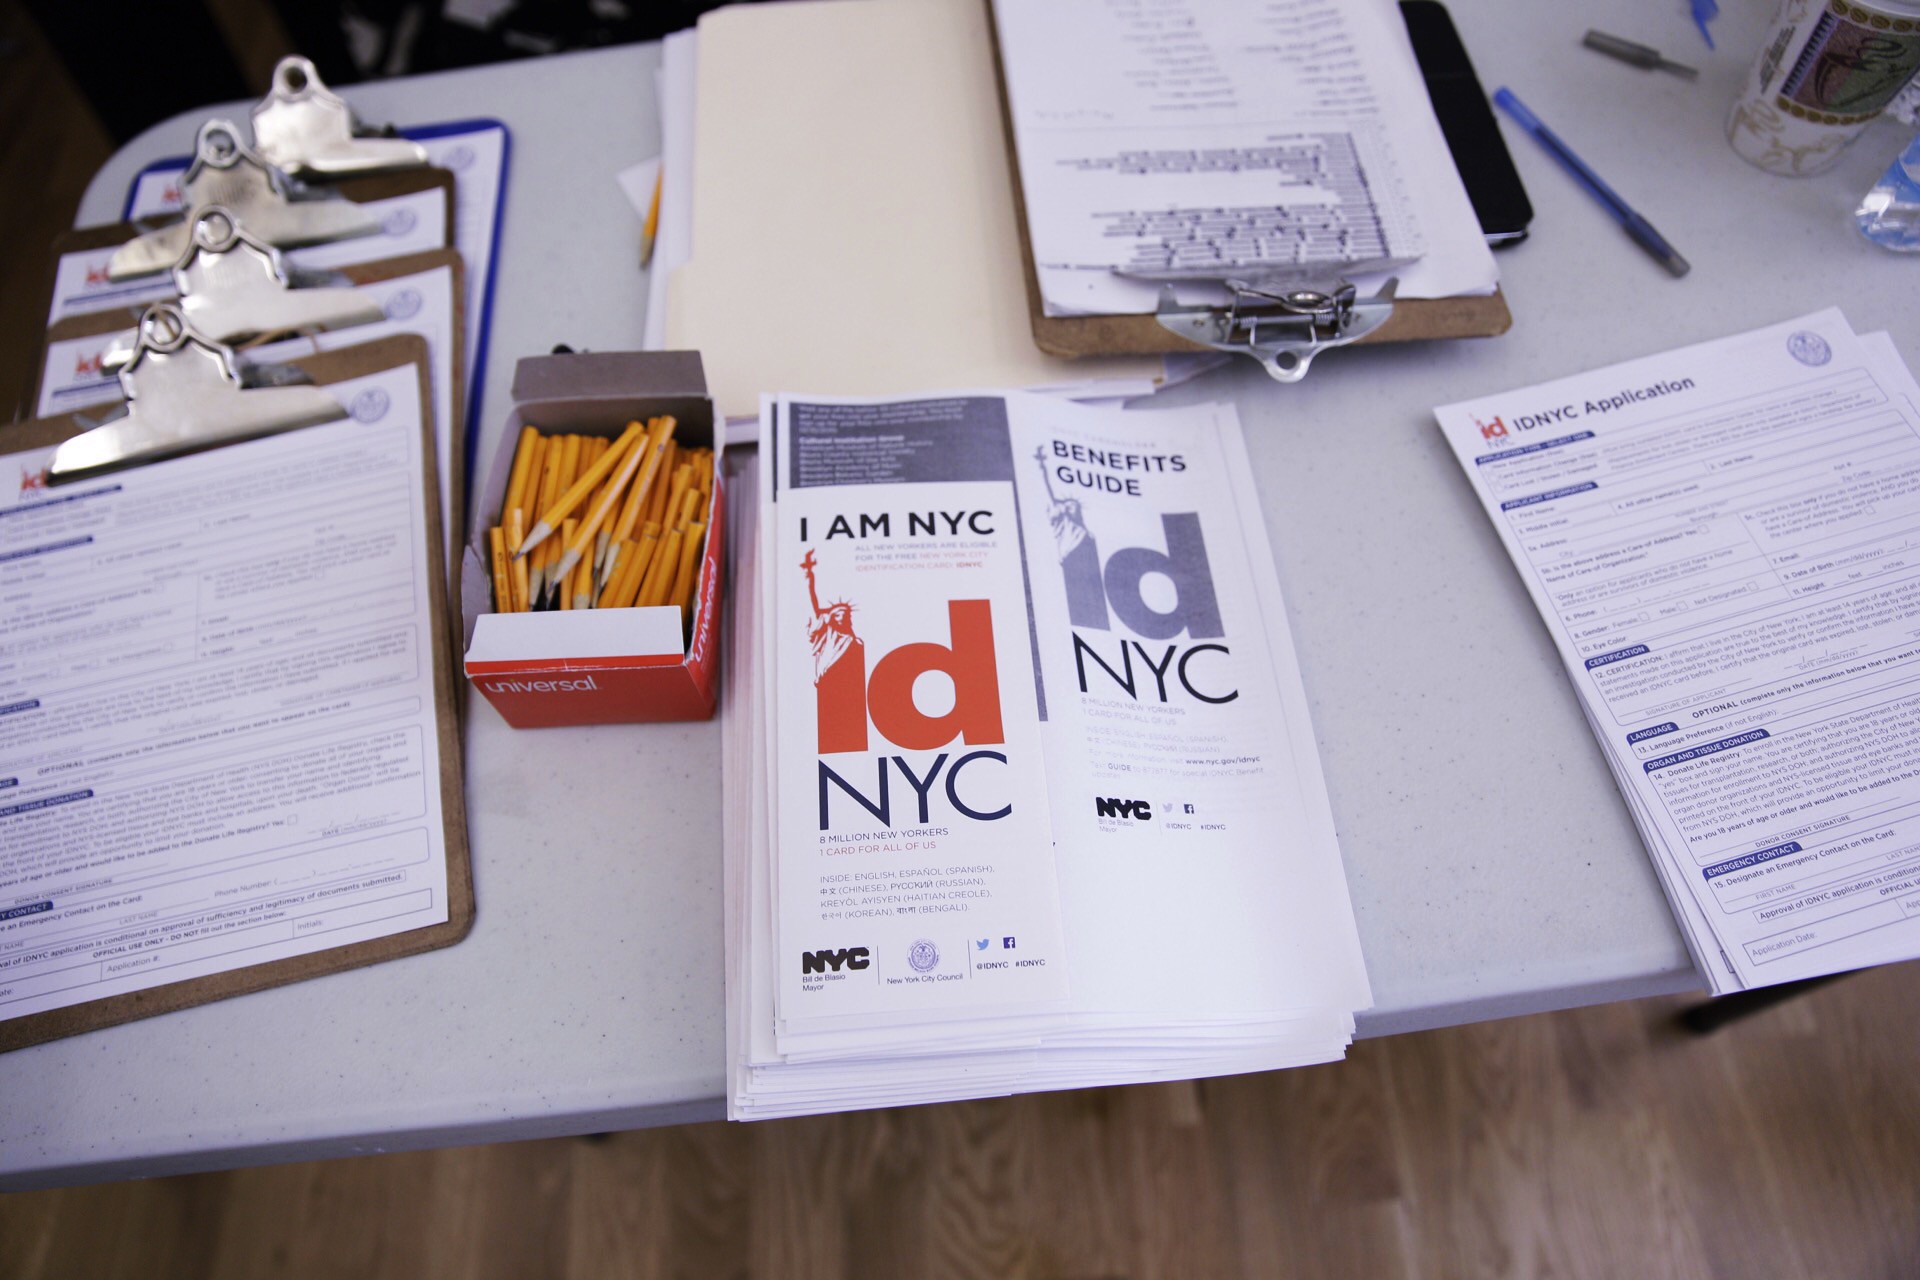 IDNYC pamphlets and forms are laid out on a table, along with pens and pencils.